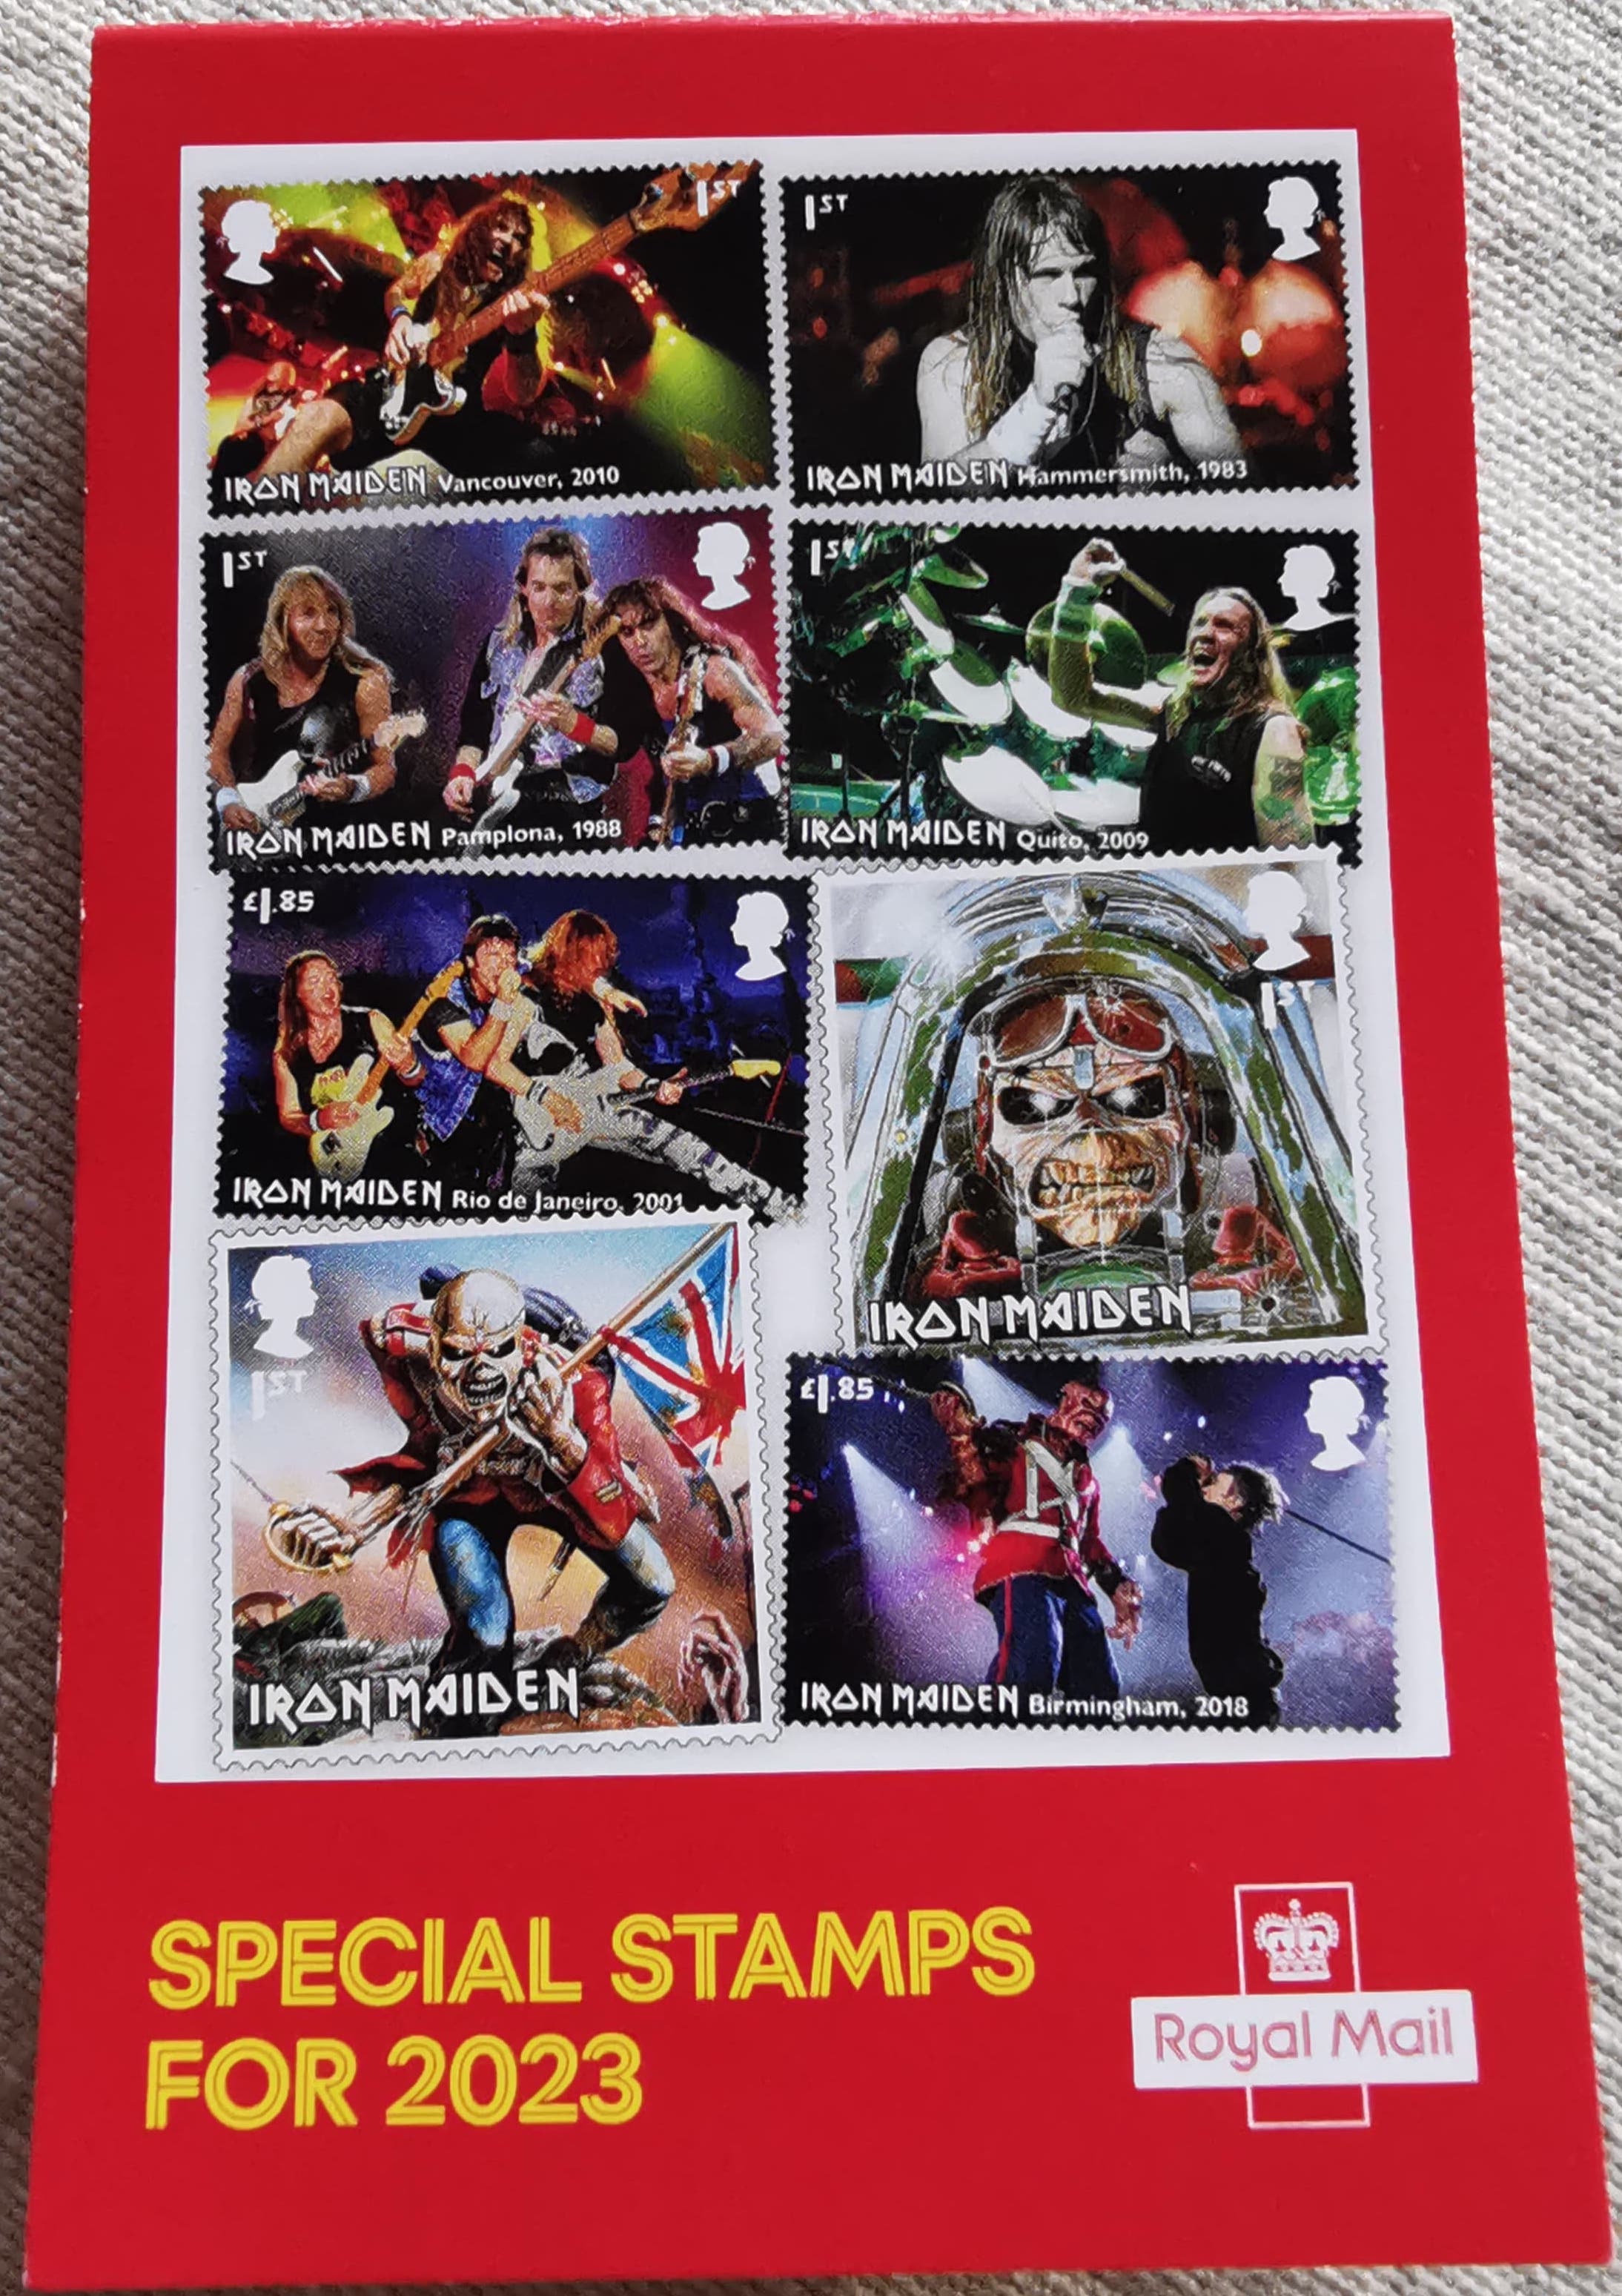 The Iron Maiden Royal Mail stamps are first class